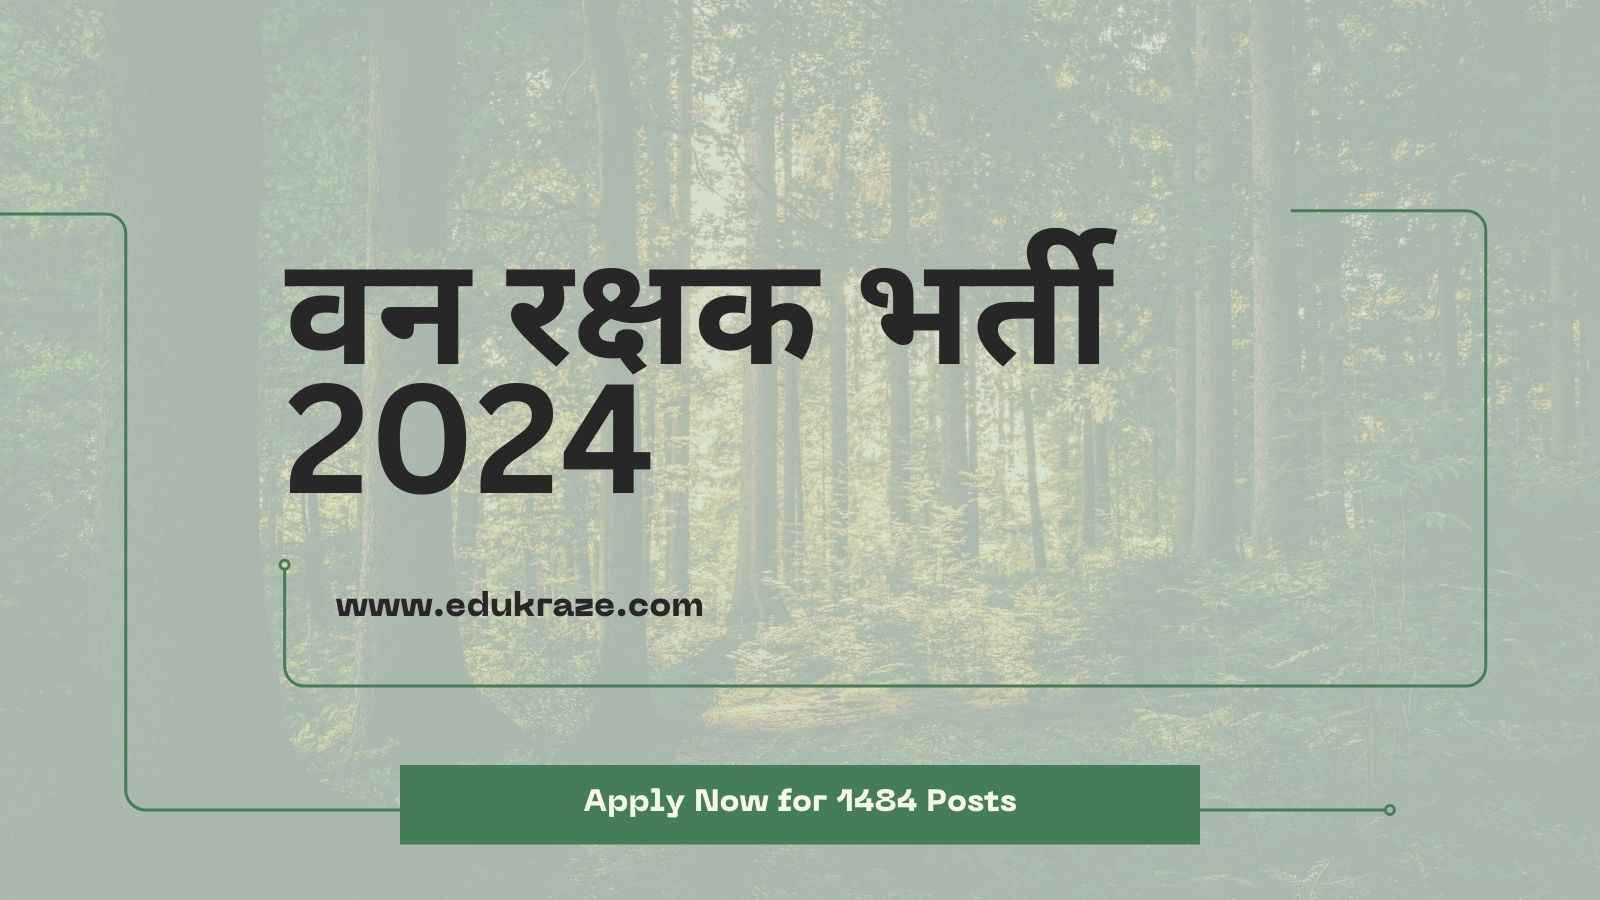 Forest Guard Recruitment 2024 in Forest Department